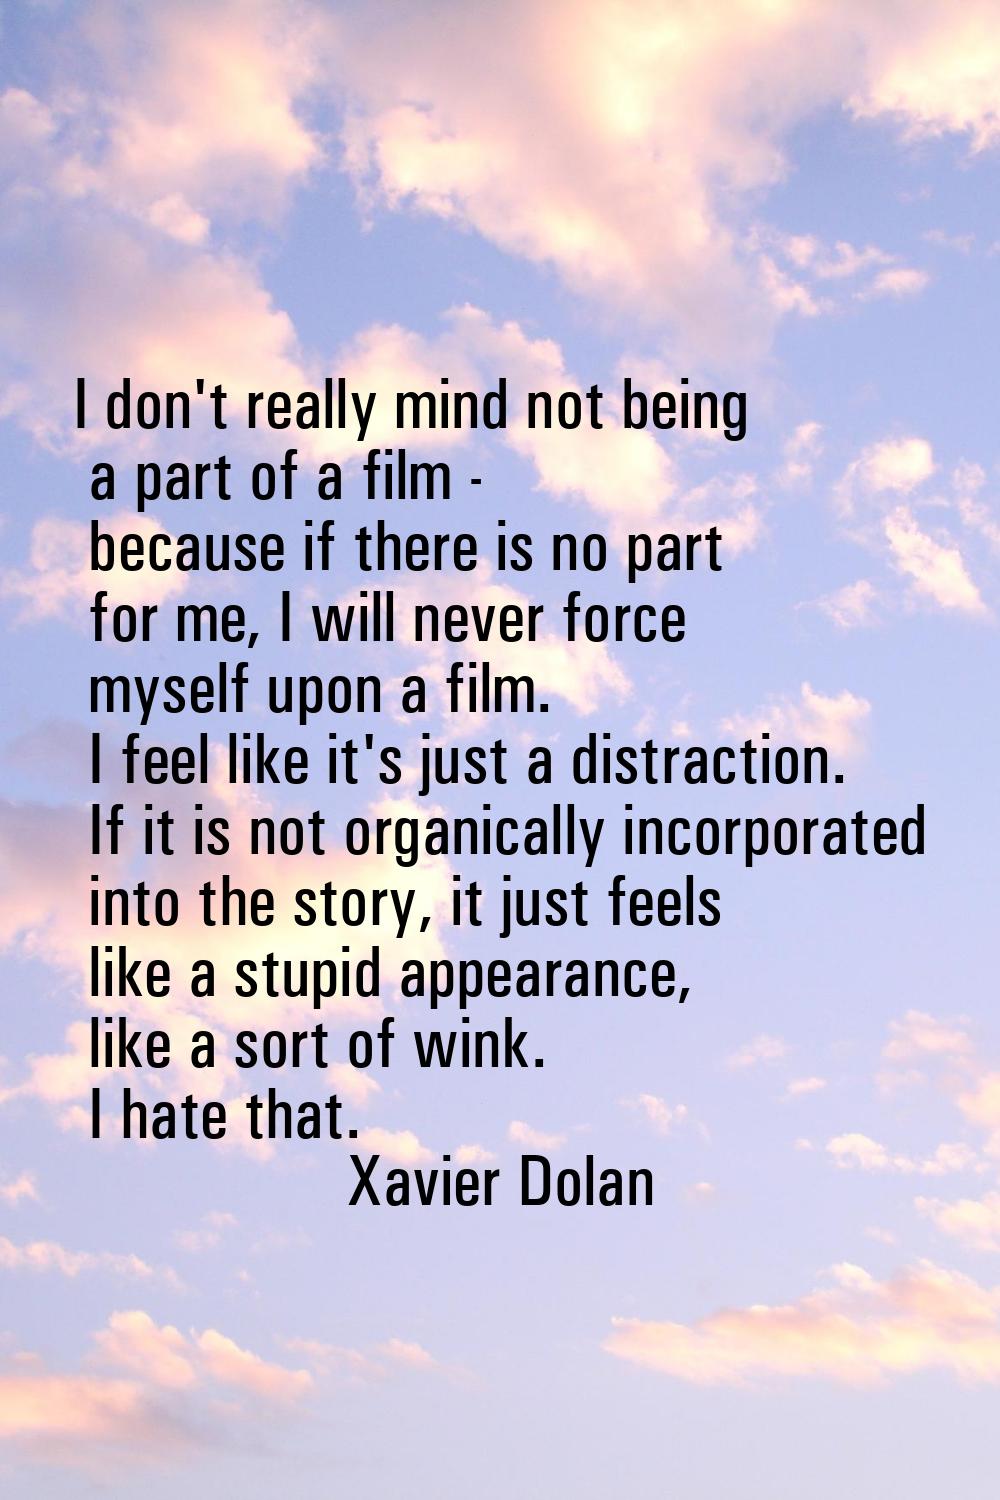 I don't really mind not being a part of a film - because if there is no part for me, I will never f